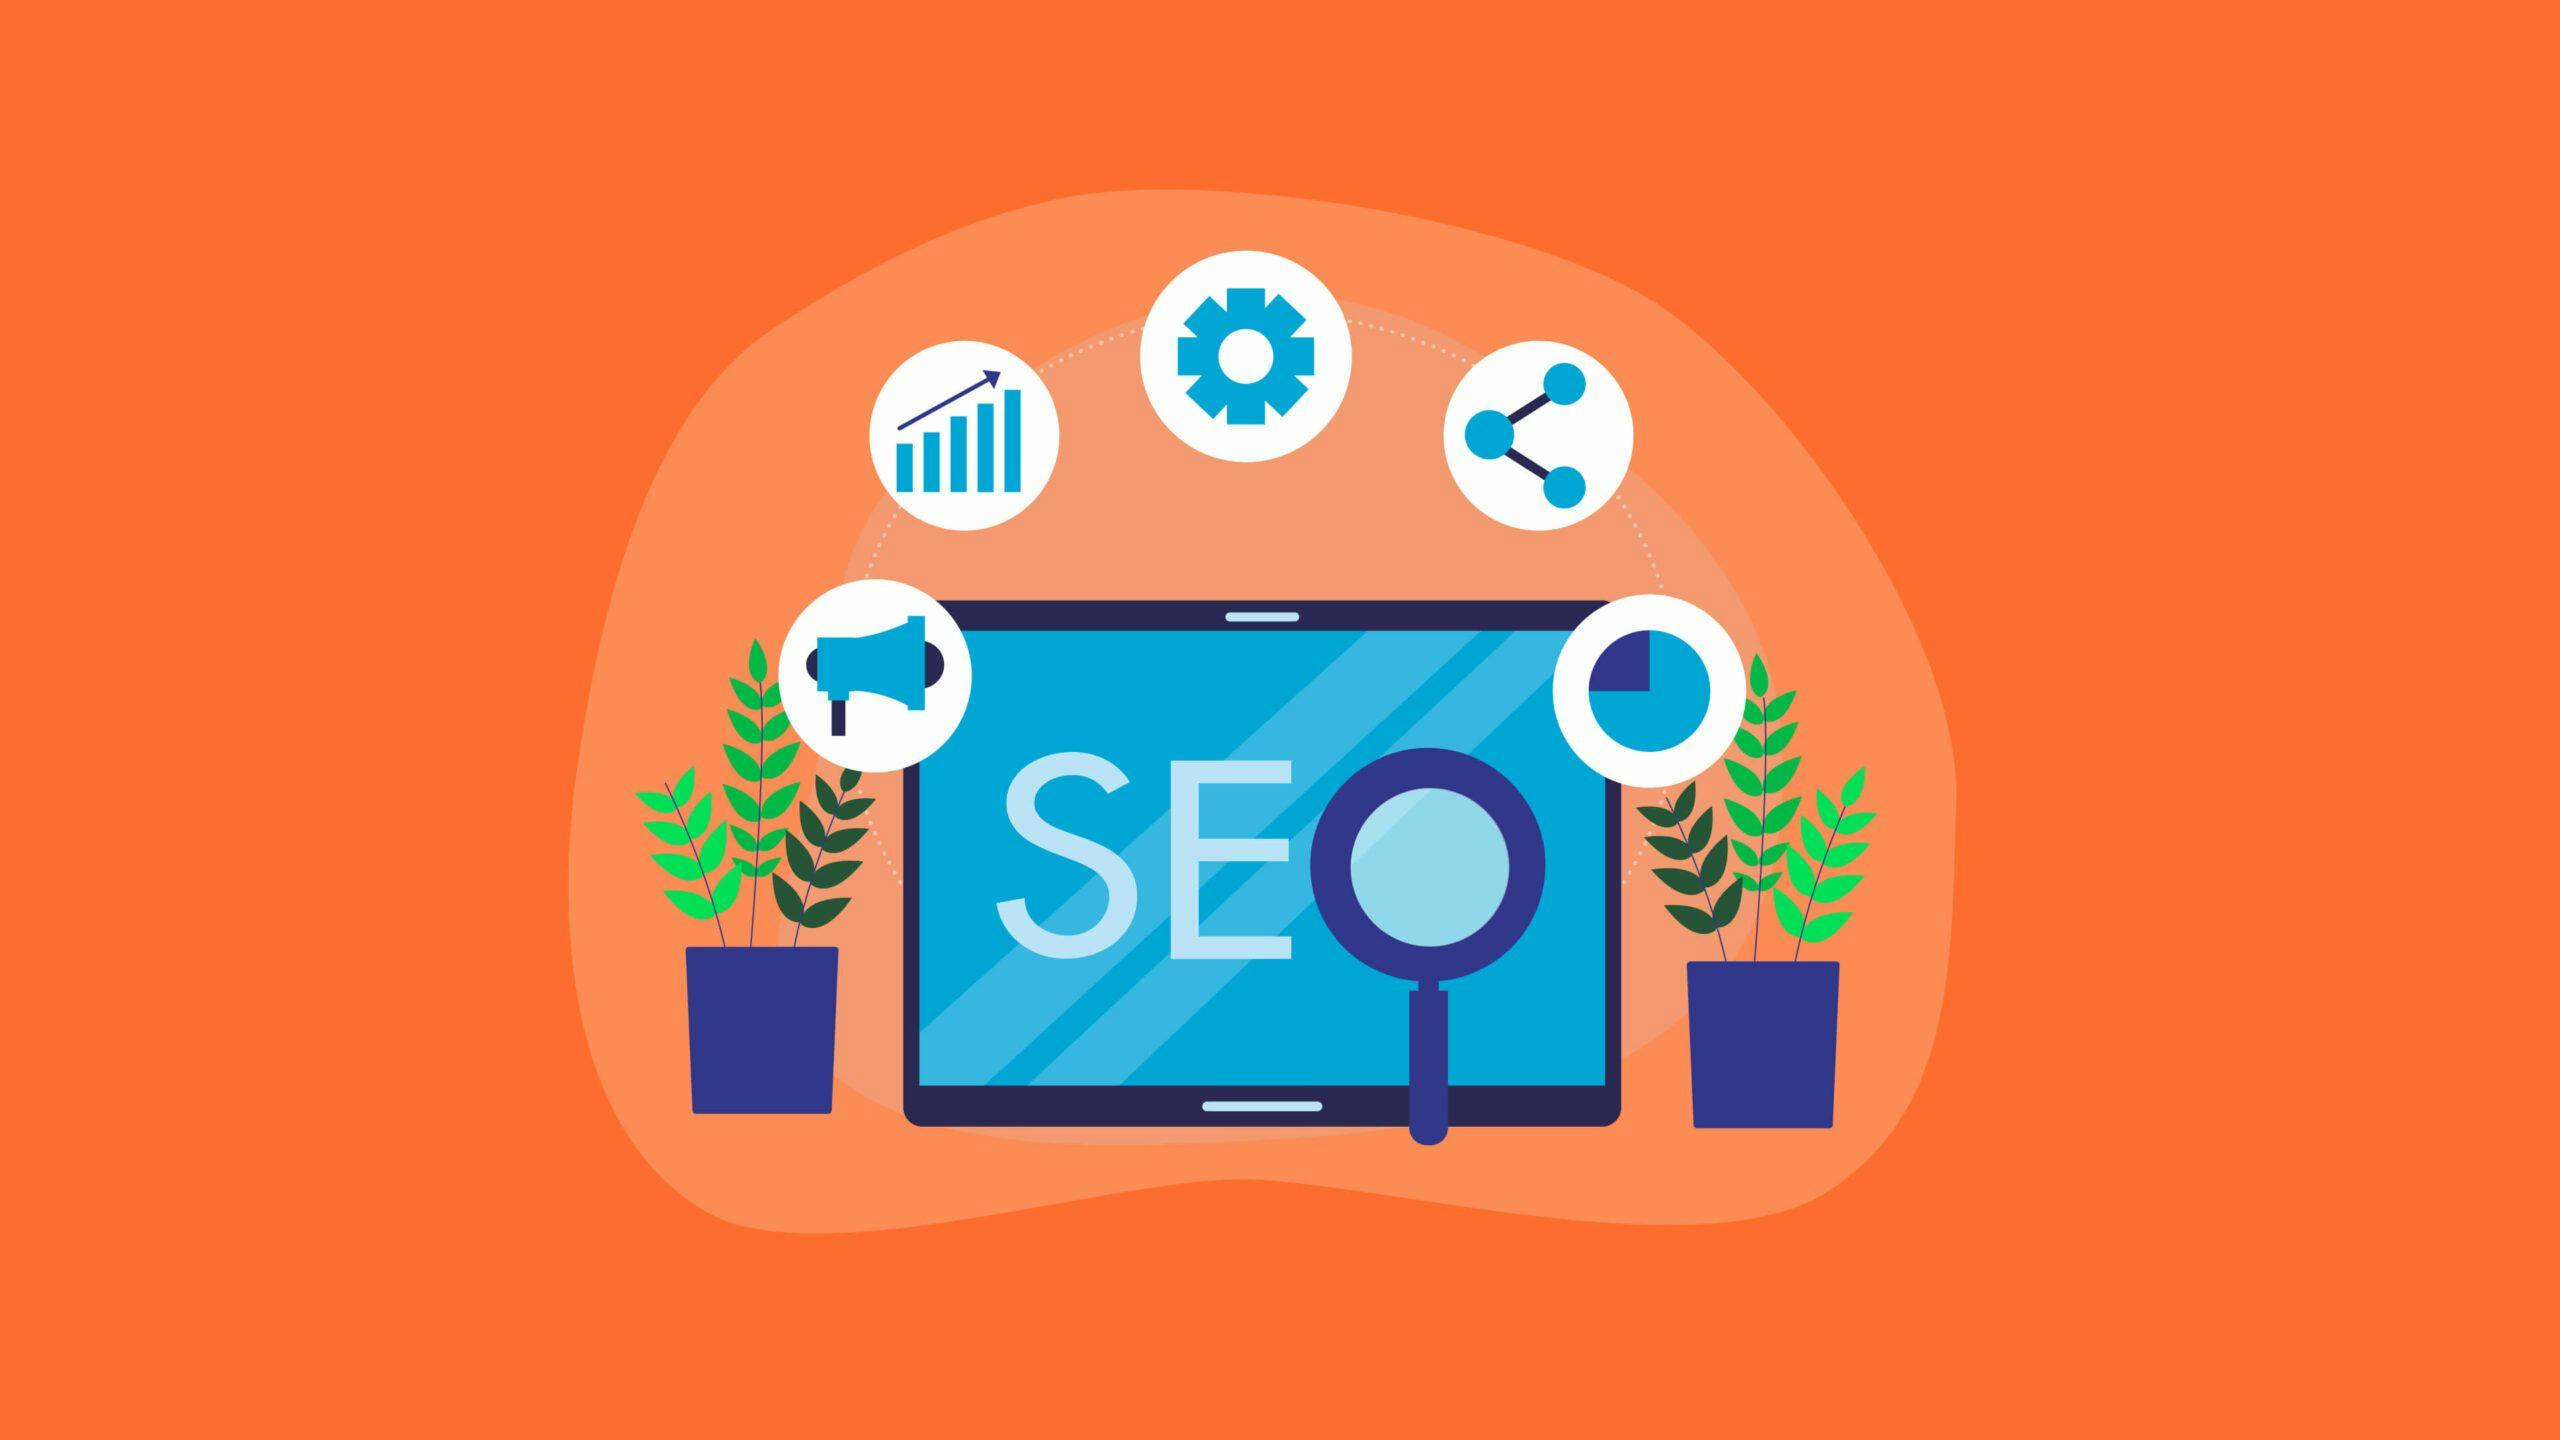 Improve your website's performance with The Best Free SEO Tools For Site Audit. Discover your website issues with seobase.